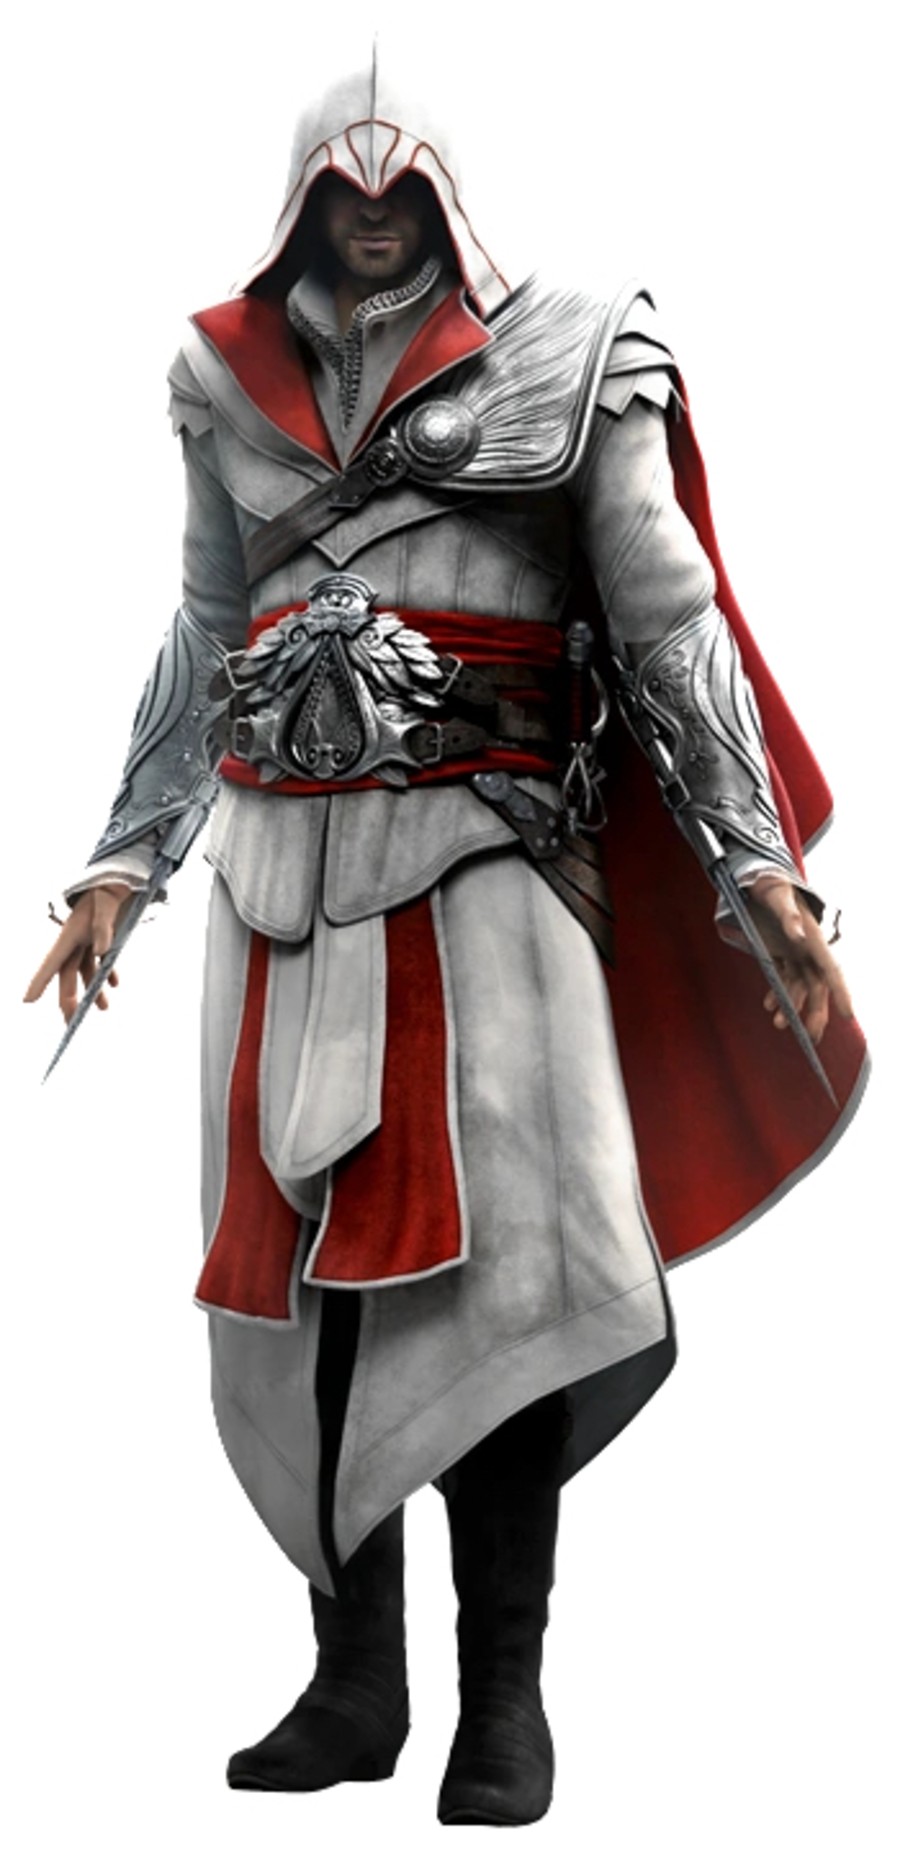 Ezio Auditore was the star of three Assassin's Creed Games, but can you remember his year of birth?